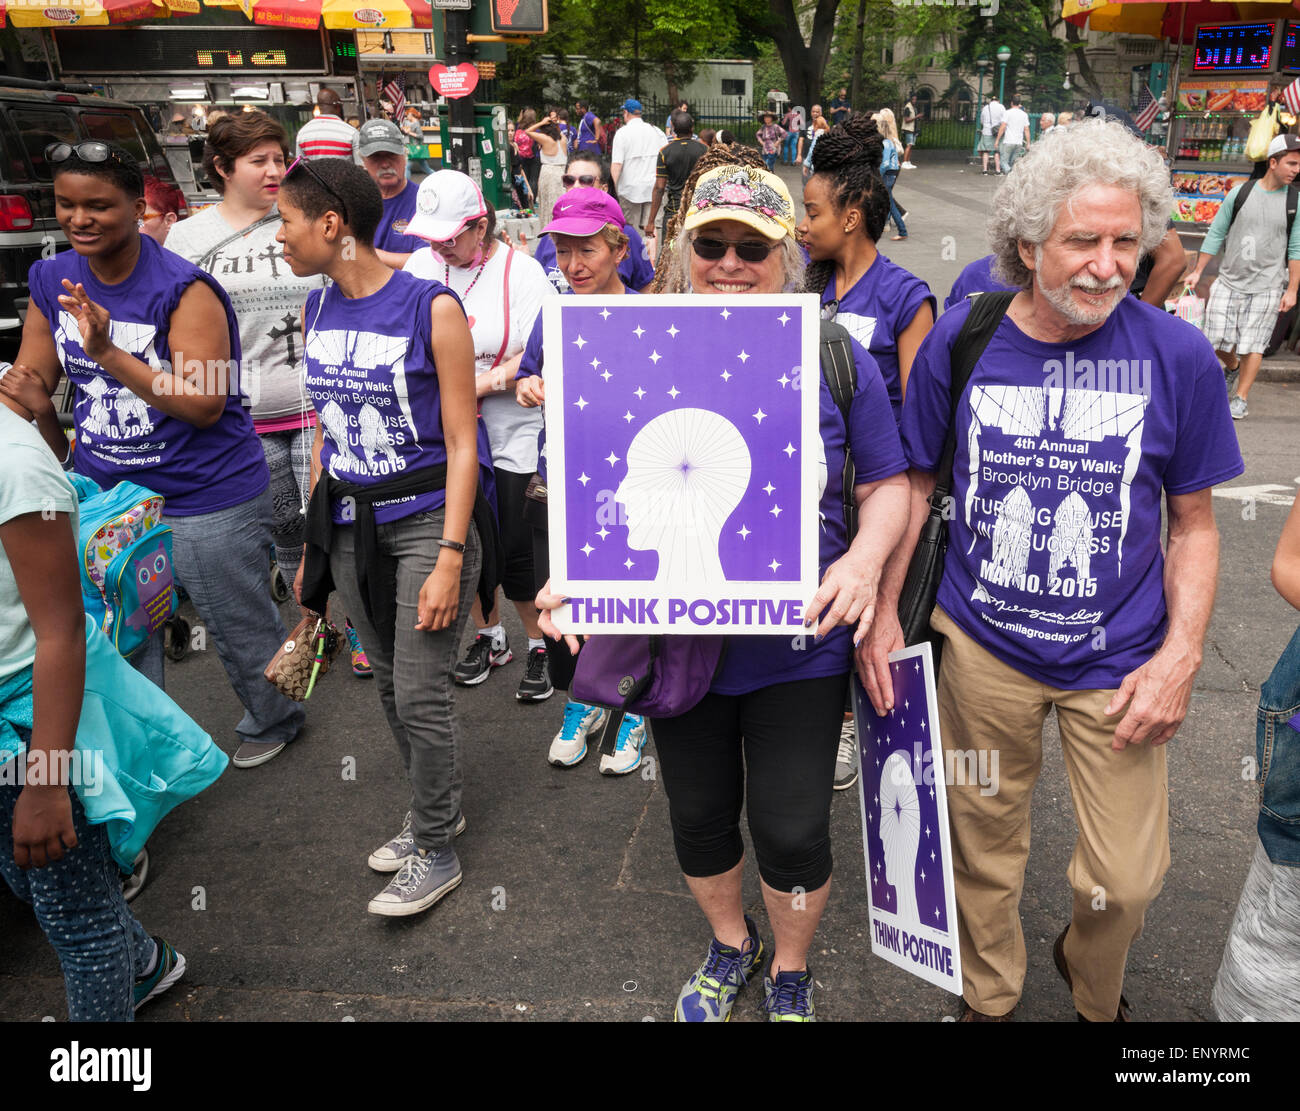 Members and supporters of the group Milagros Day Worldwide participate in their Mother's Day Walk against domestic violence starting at City Hall in New York on Mother's Day, Sunday, May 10, 2015. Several hundred men, women and children, some of them victims,  participated in their warm up pep rally and walked across the bridge to raise money and awareness for the victims of domestic violence. (© Richard B. Levine) Stock Photo